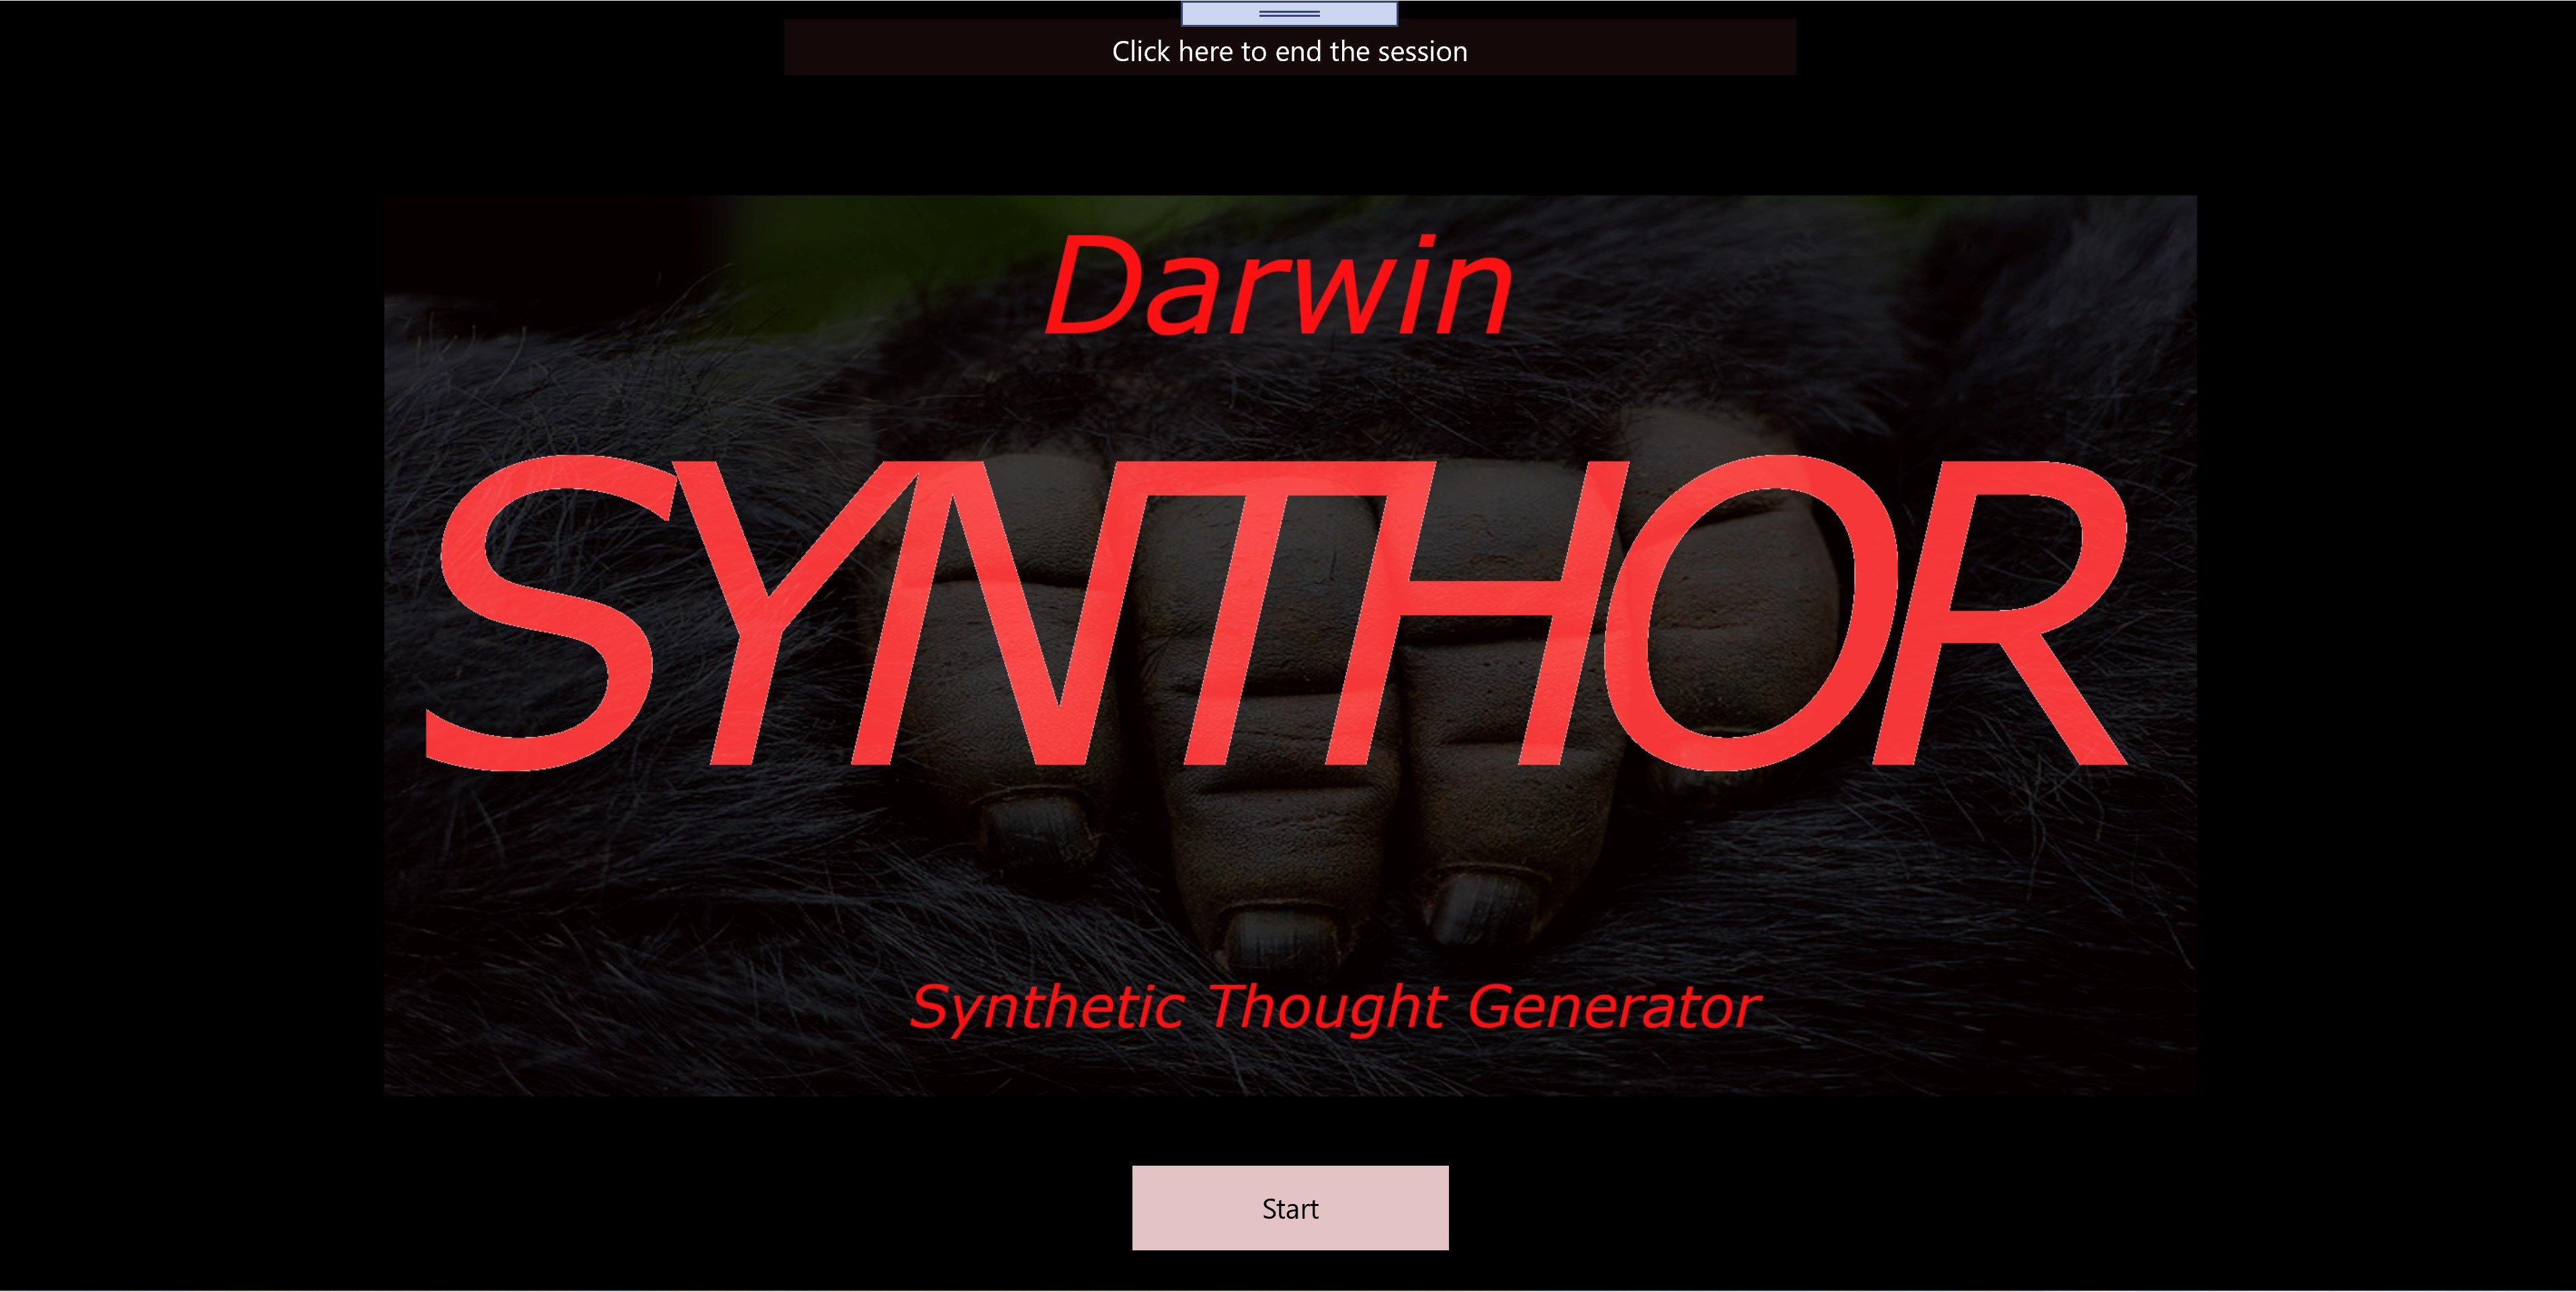 Opening screen of the Synthor.